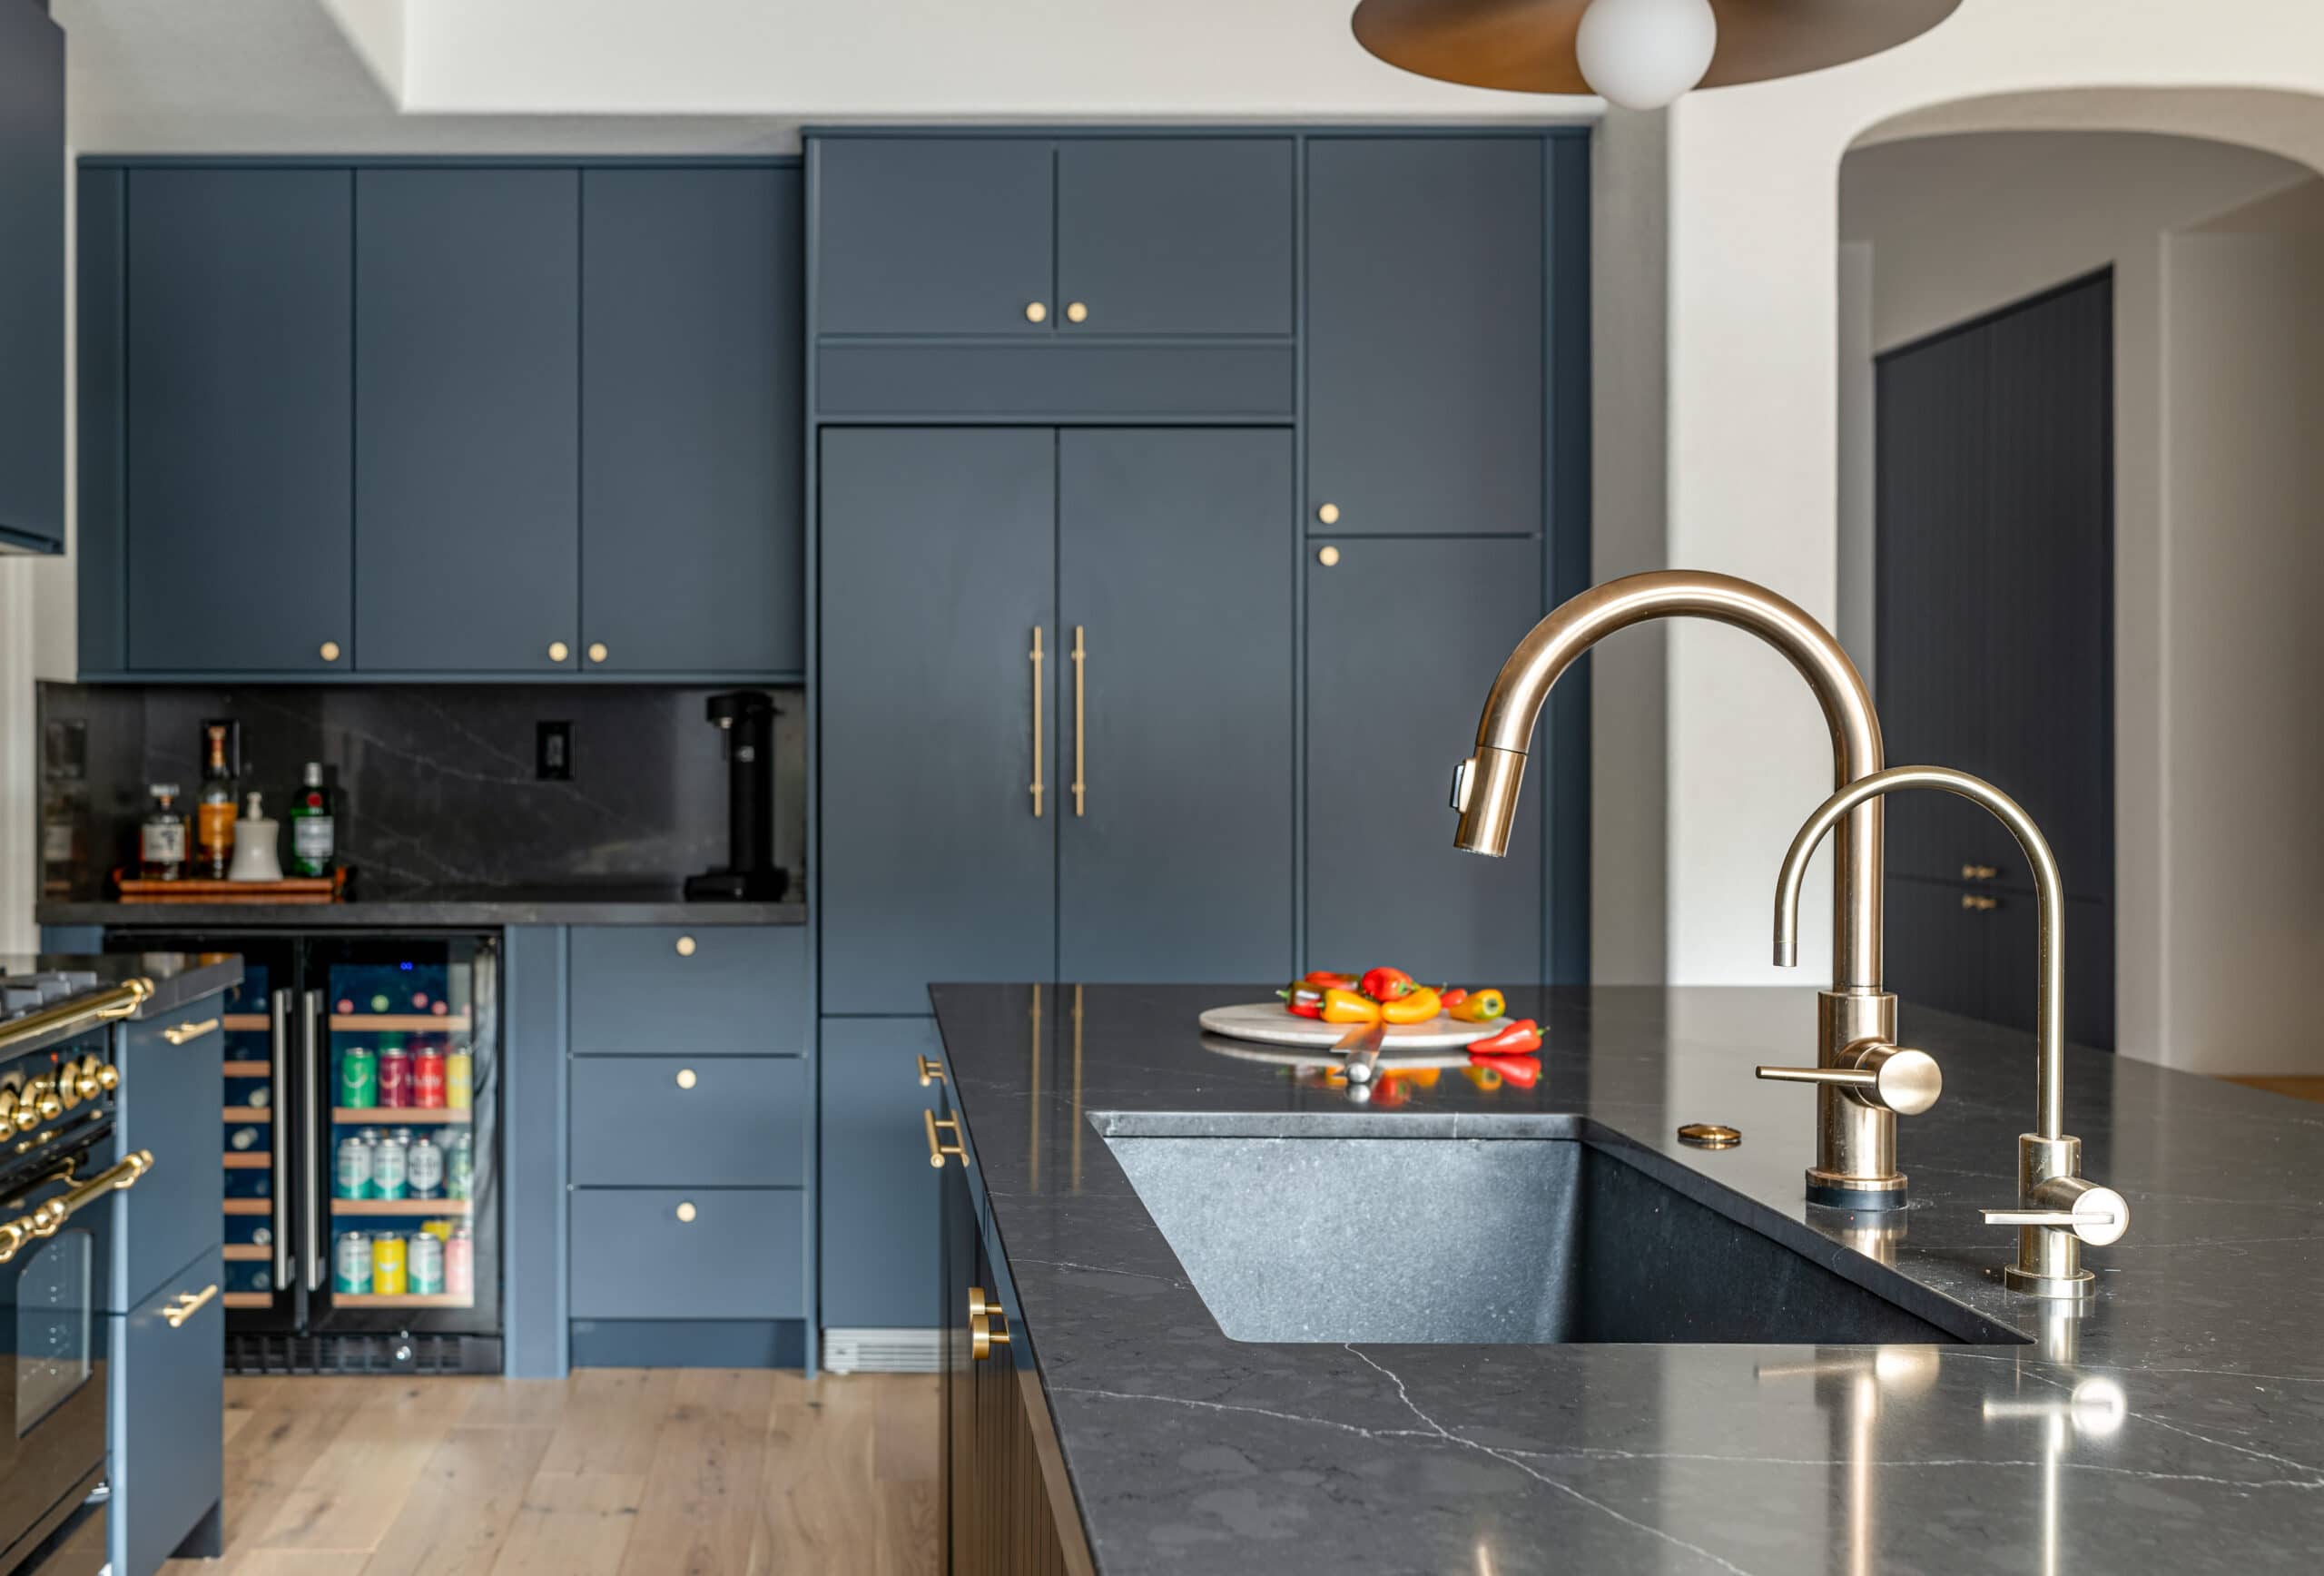 Navy kitchen with wall of cabinets and dark backsplash